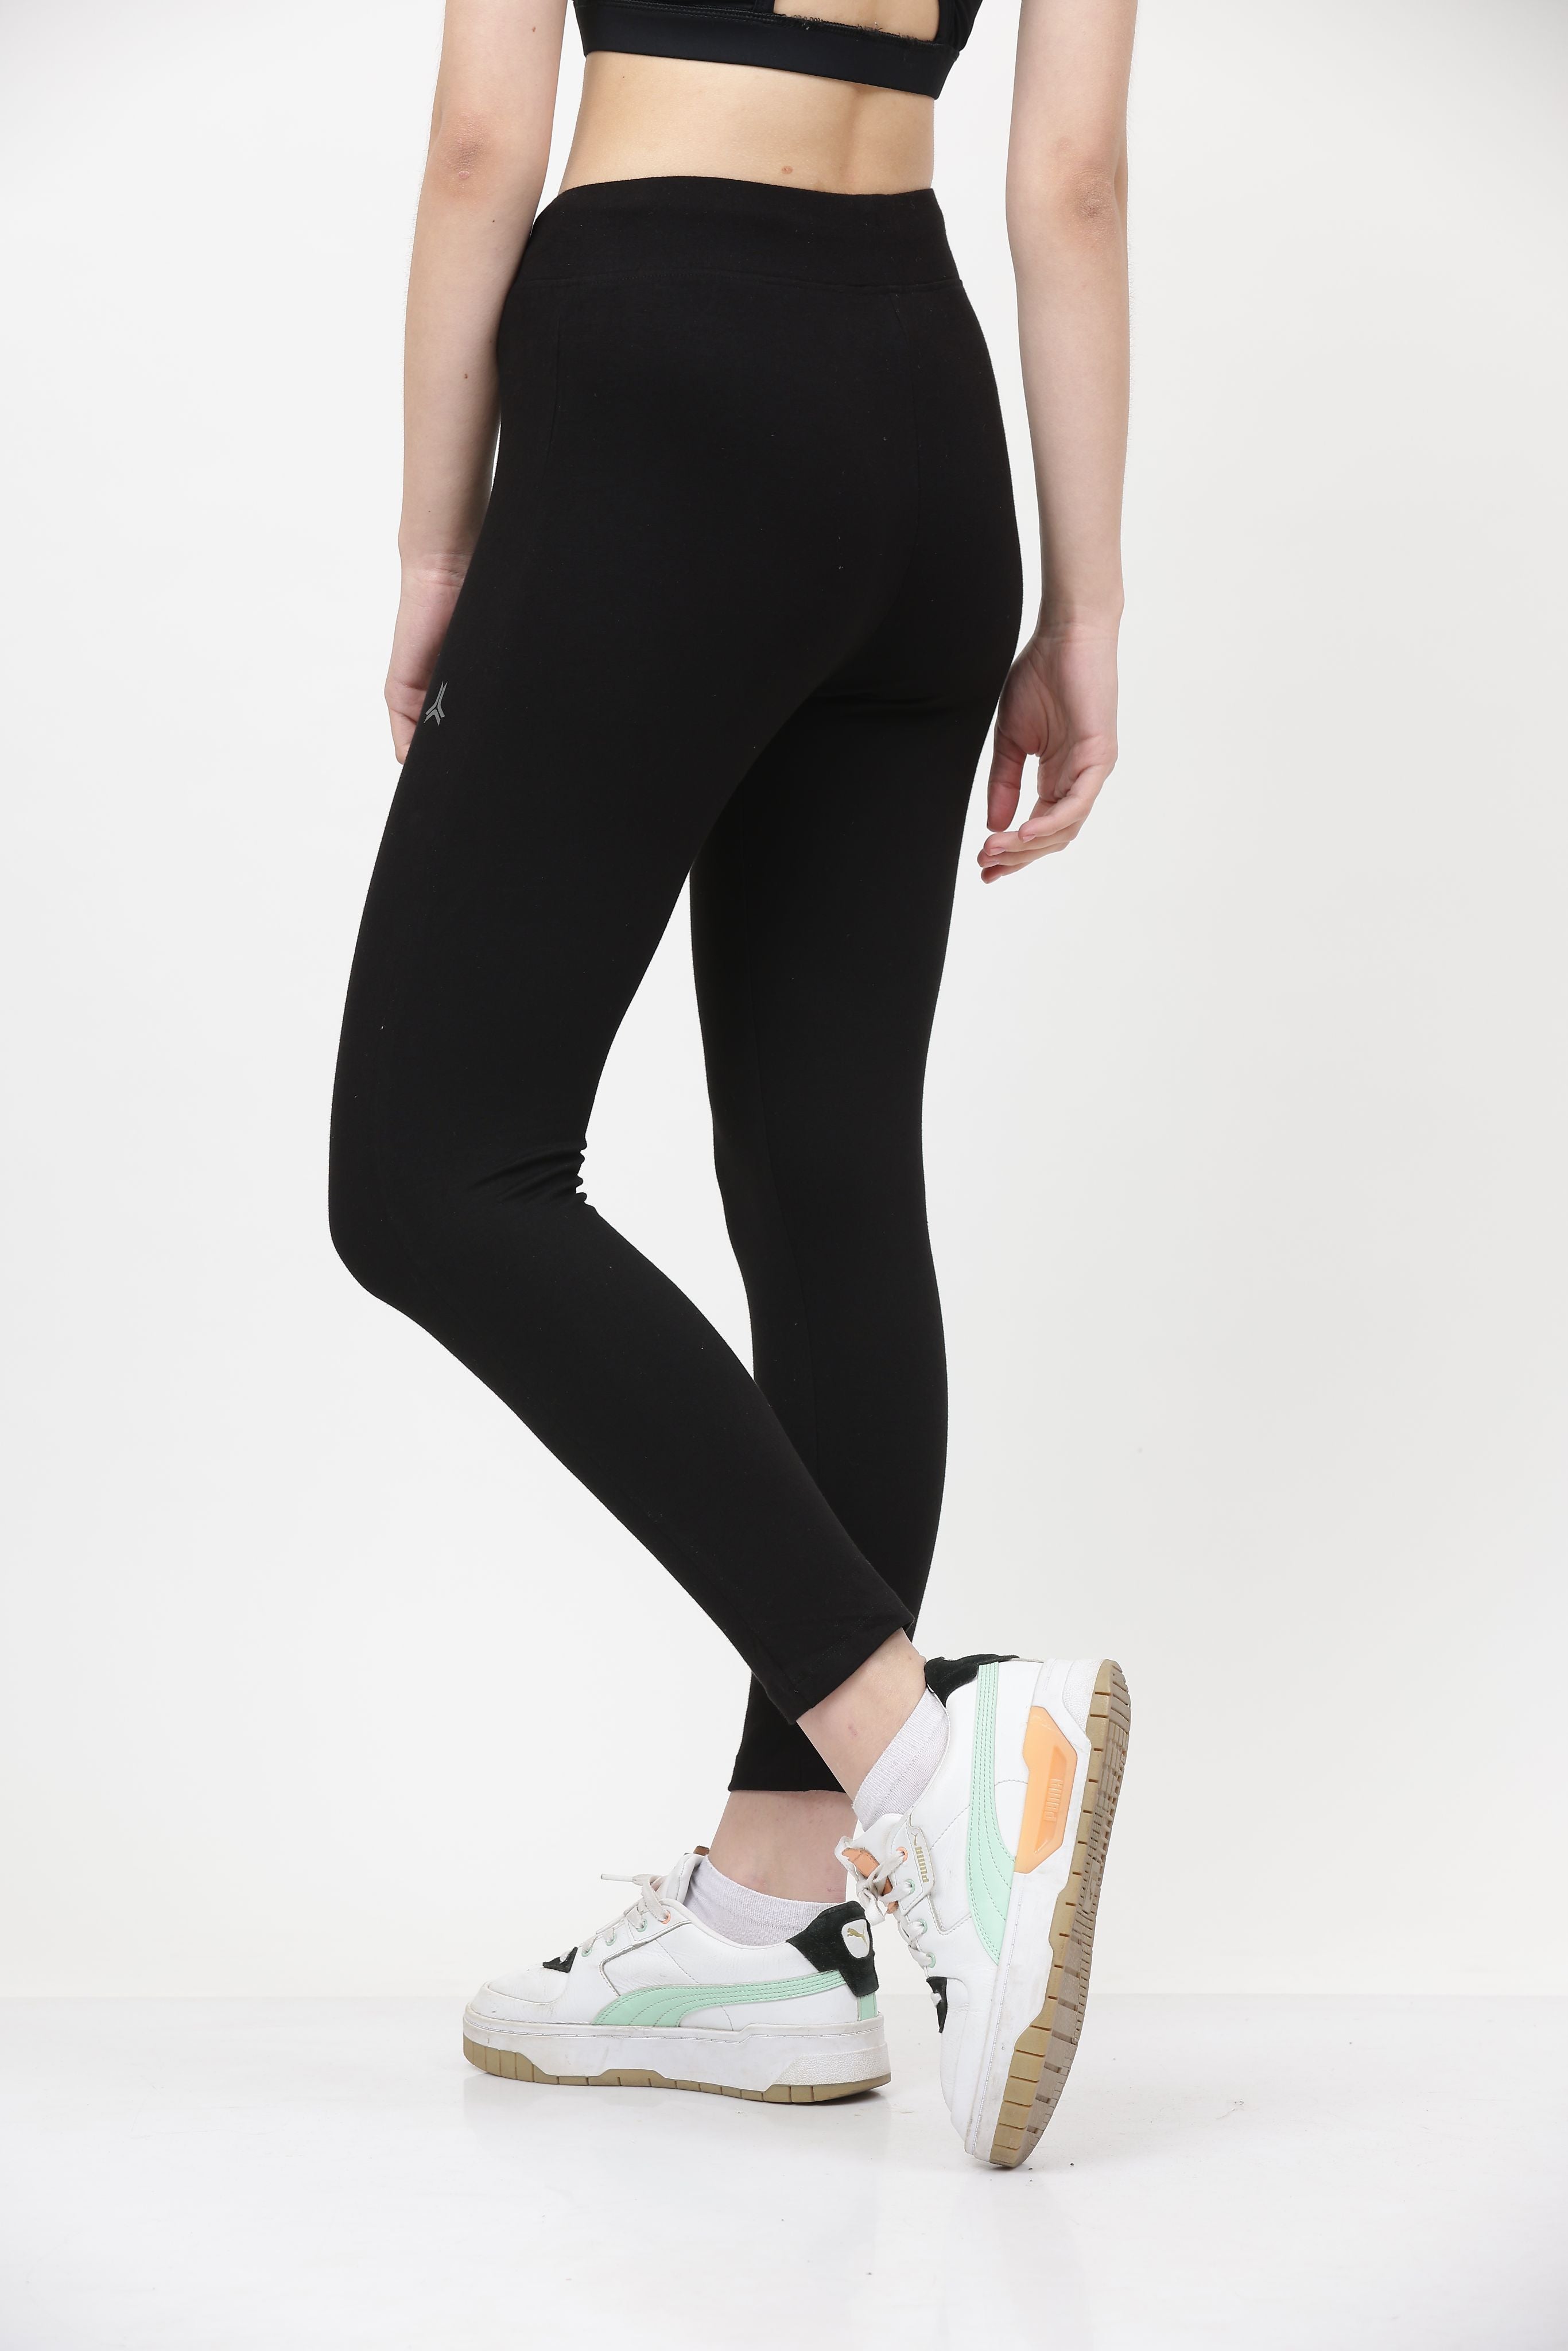 best offers on yoga pants from yoga leggings manufacturer